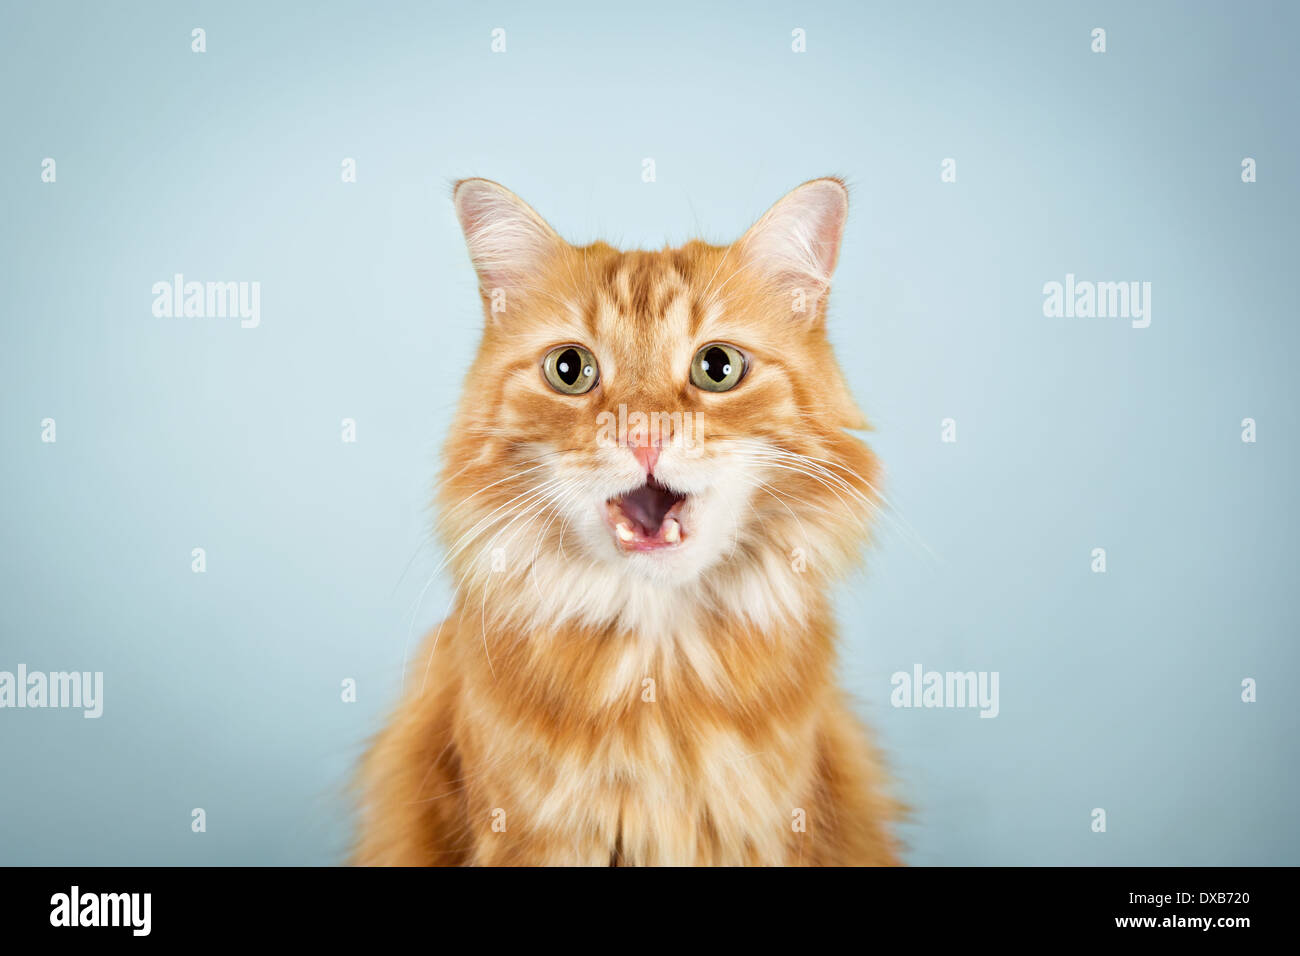 Cute orange cat with mouth open, staring at camera. Stock Photo